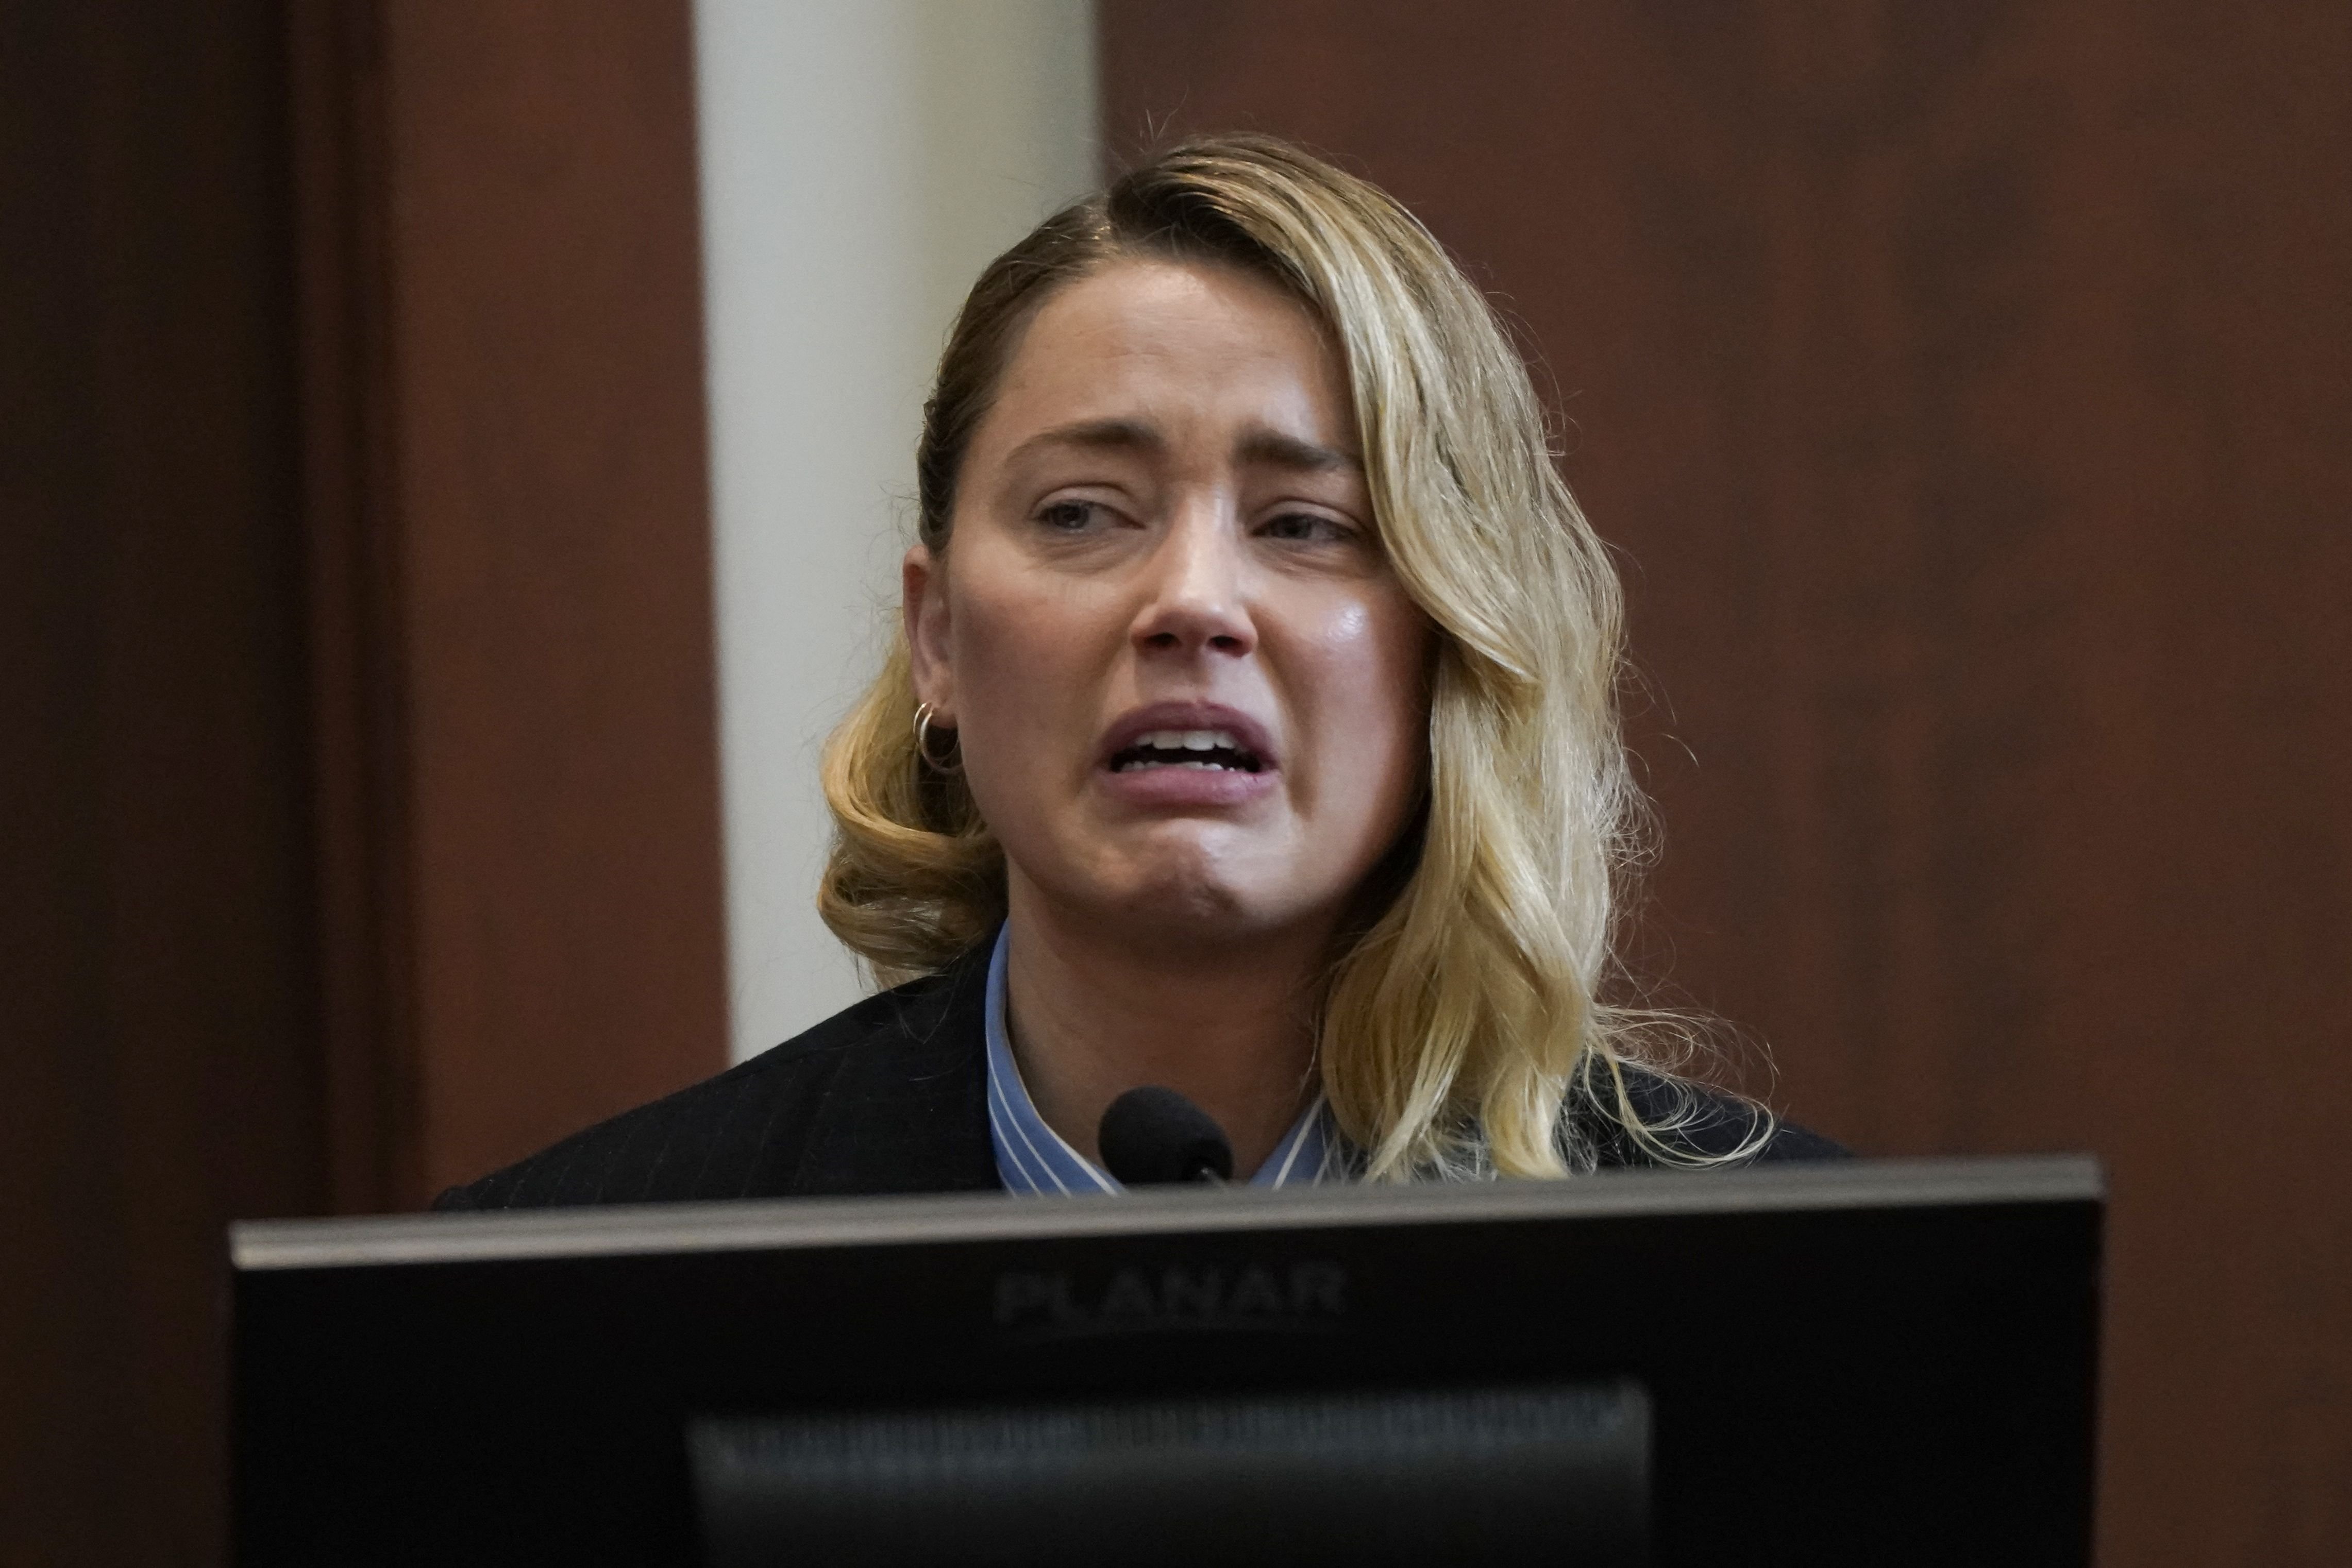 Amber Heard testifies at Fairfax County Circuit Court during a defamation case against her by Depp in Fairfax, Virginia, on May 4, 2022. | Source: Getty Images